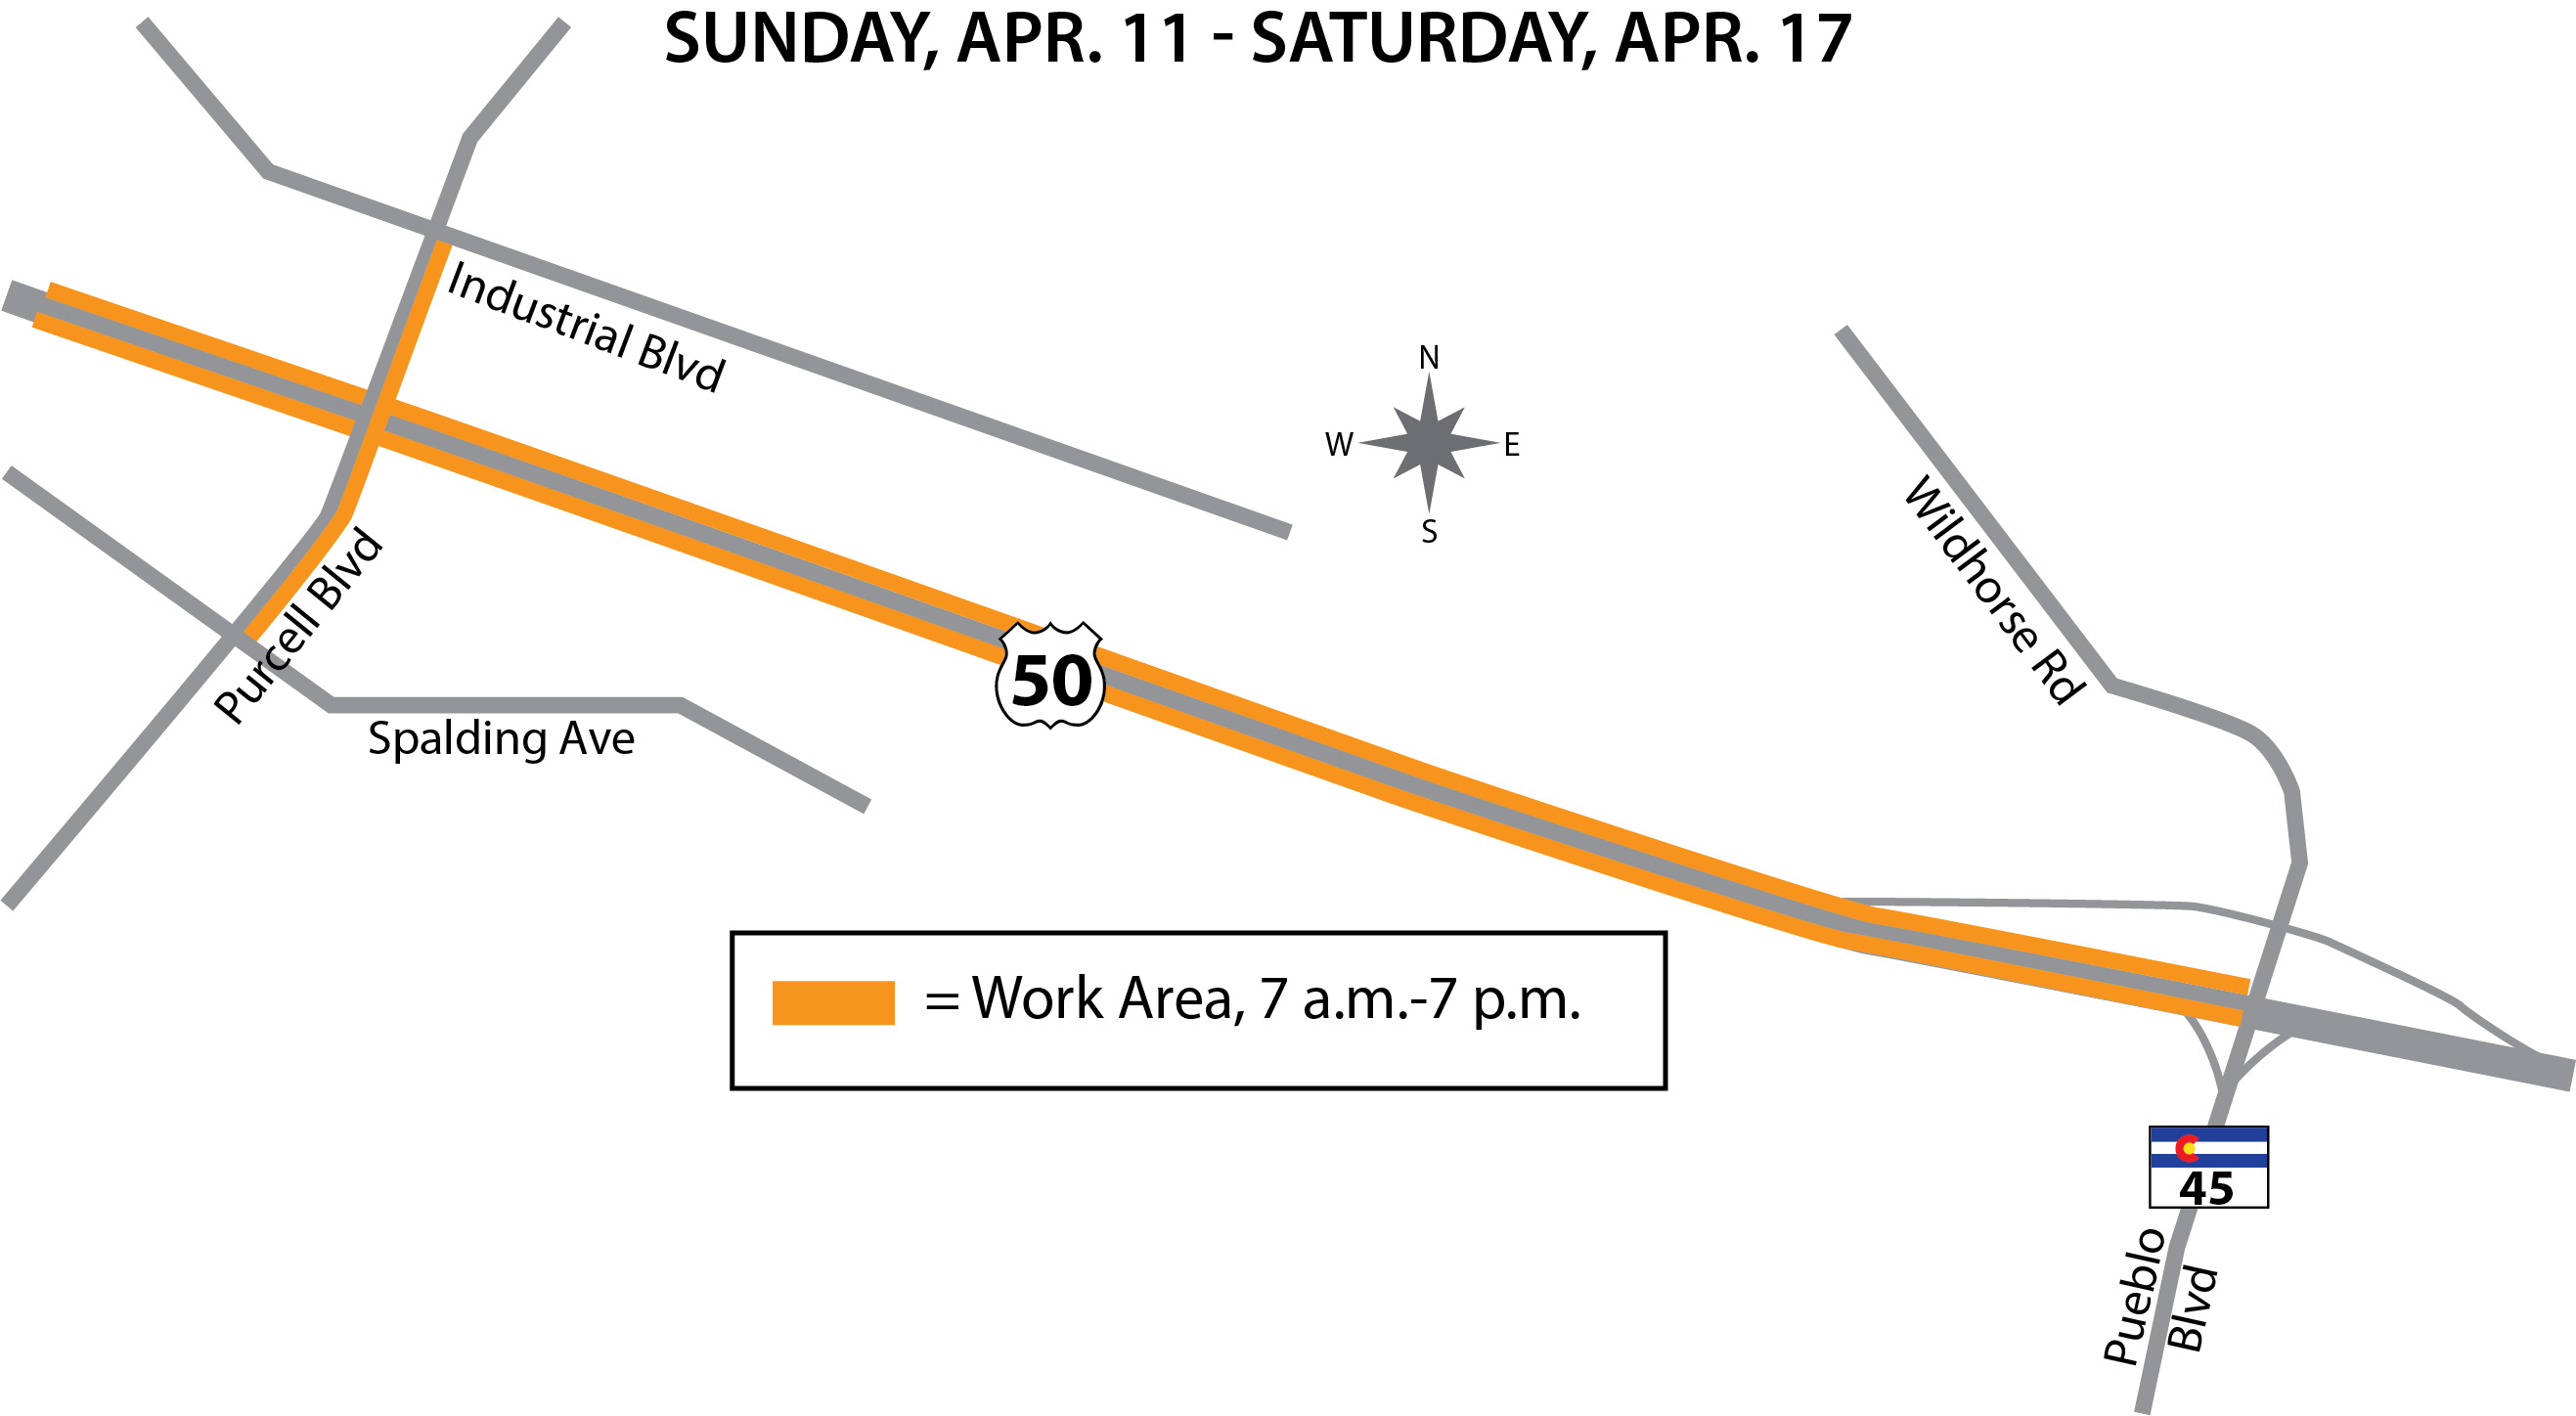 US 50 Purcell map Apr 11.jpg detail image